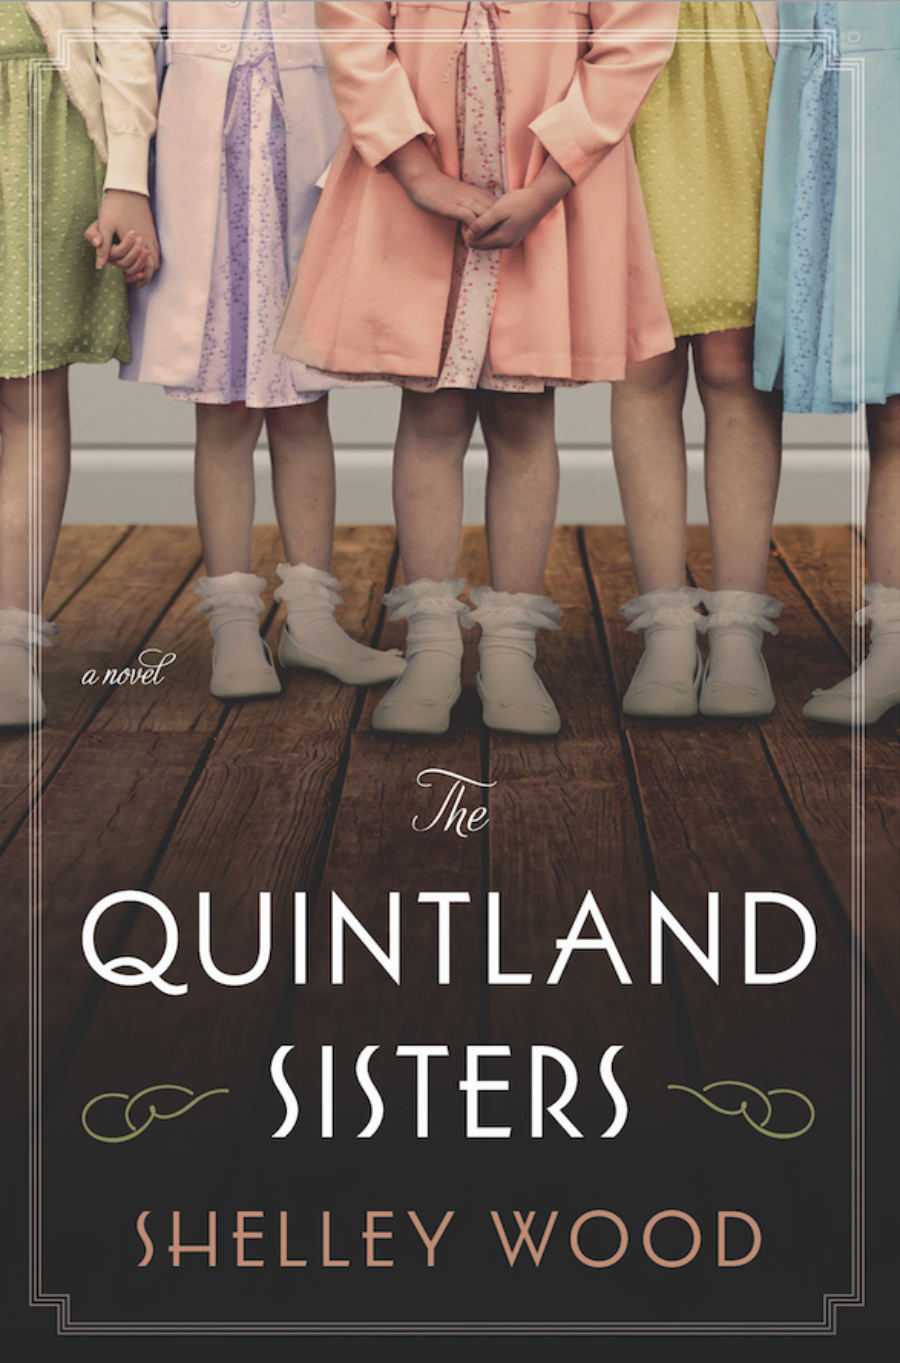 The cover of "The Quintland Sisters" a novel by Shelley Wood